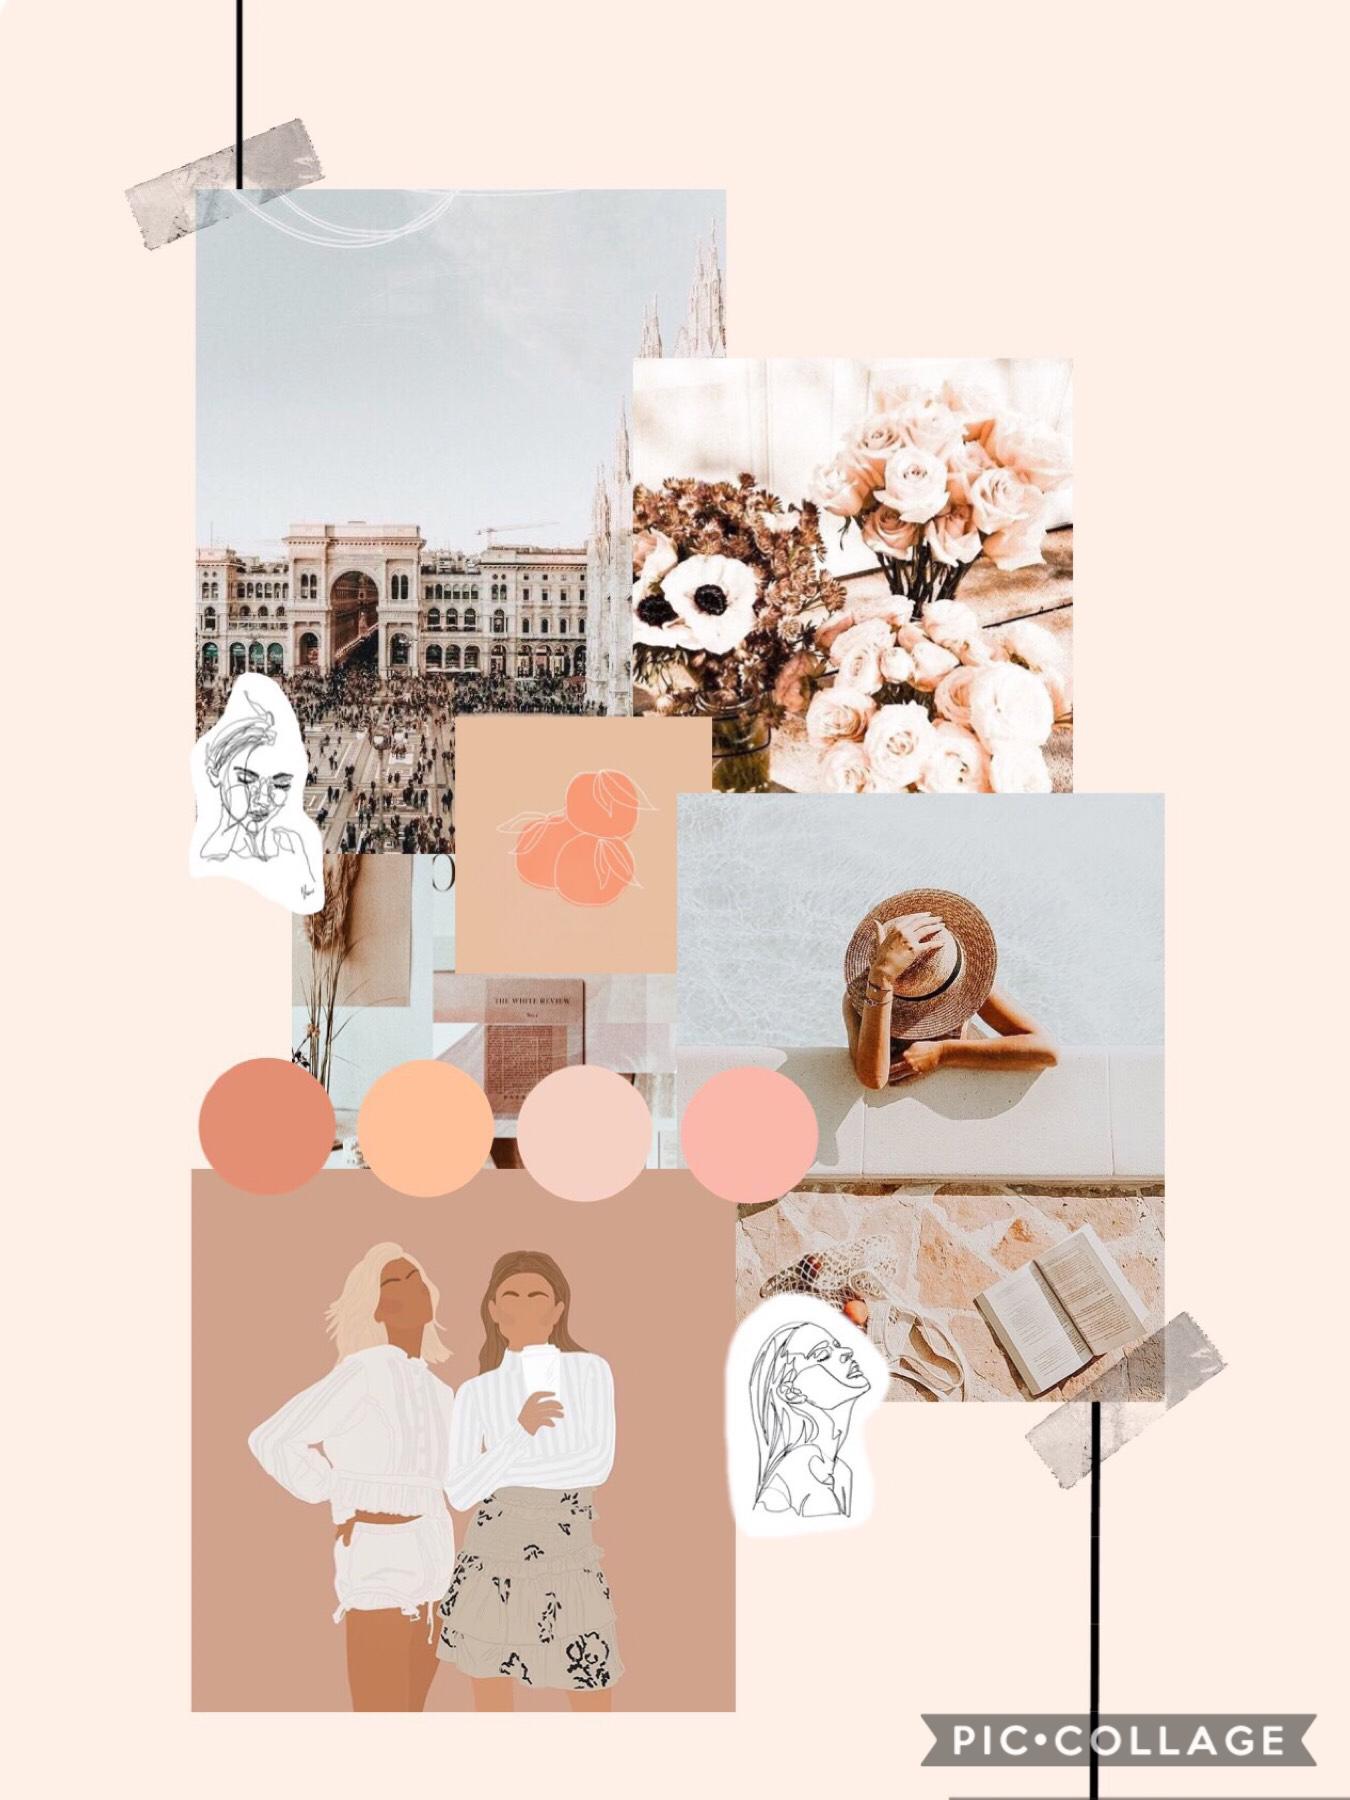 Tapppp ☼

Hey guy’s Hope you like this collage. It is based on my aesthetic, I love peachy pinks and greys. Pls like and comment, thx ❥❥